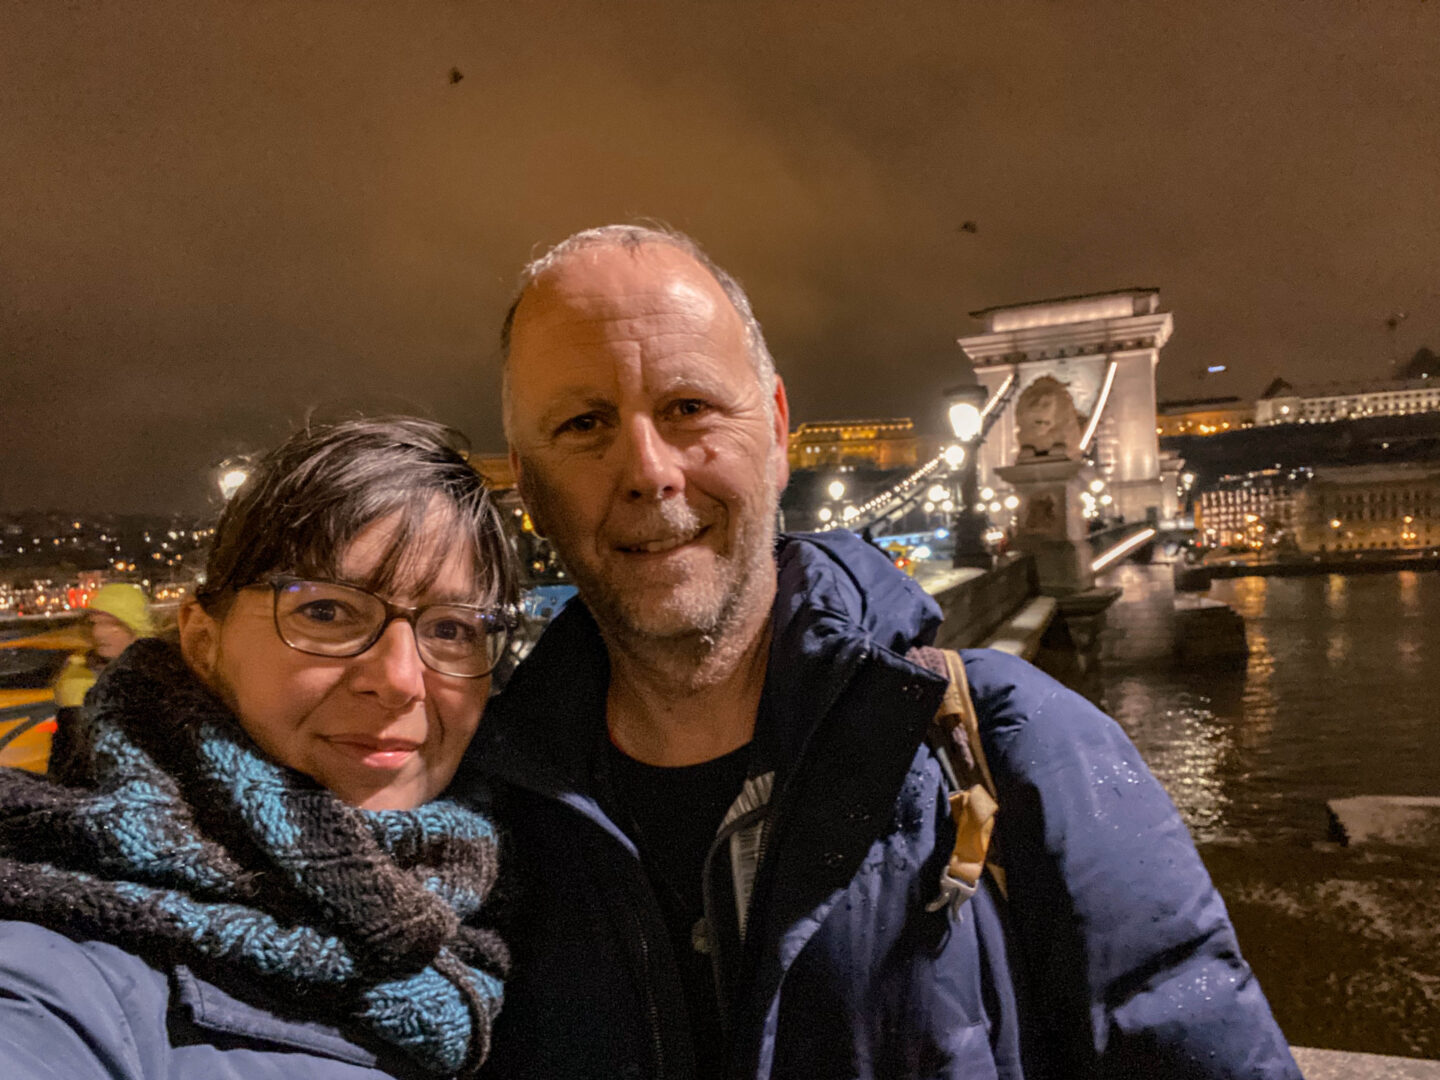 Hungary - Mini summary in Budapest: impressions and observations